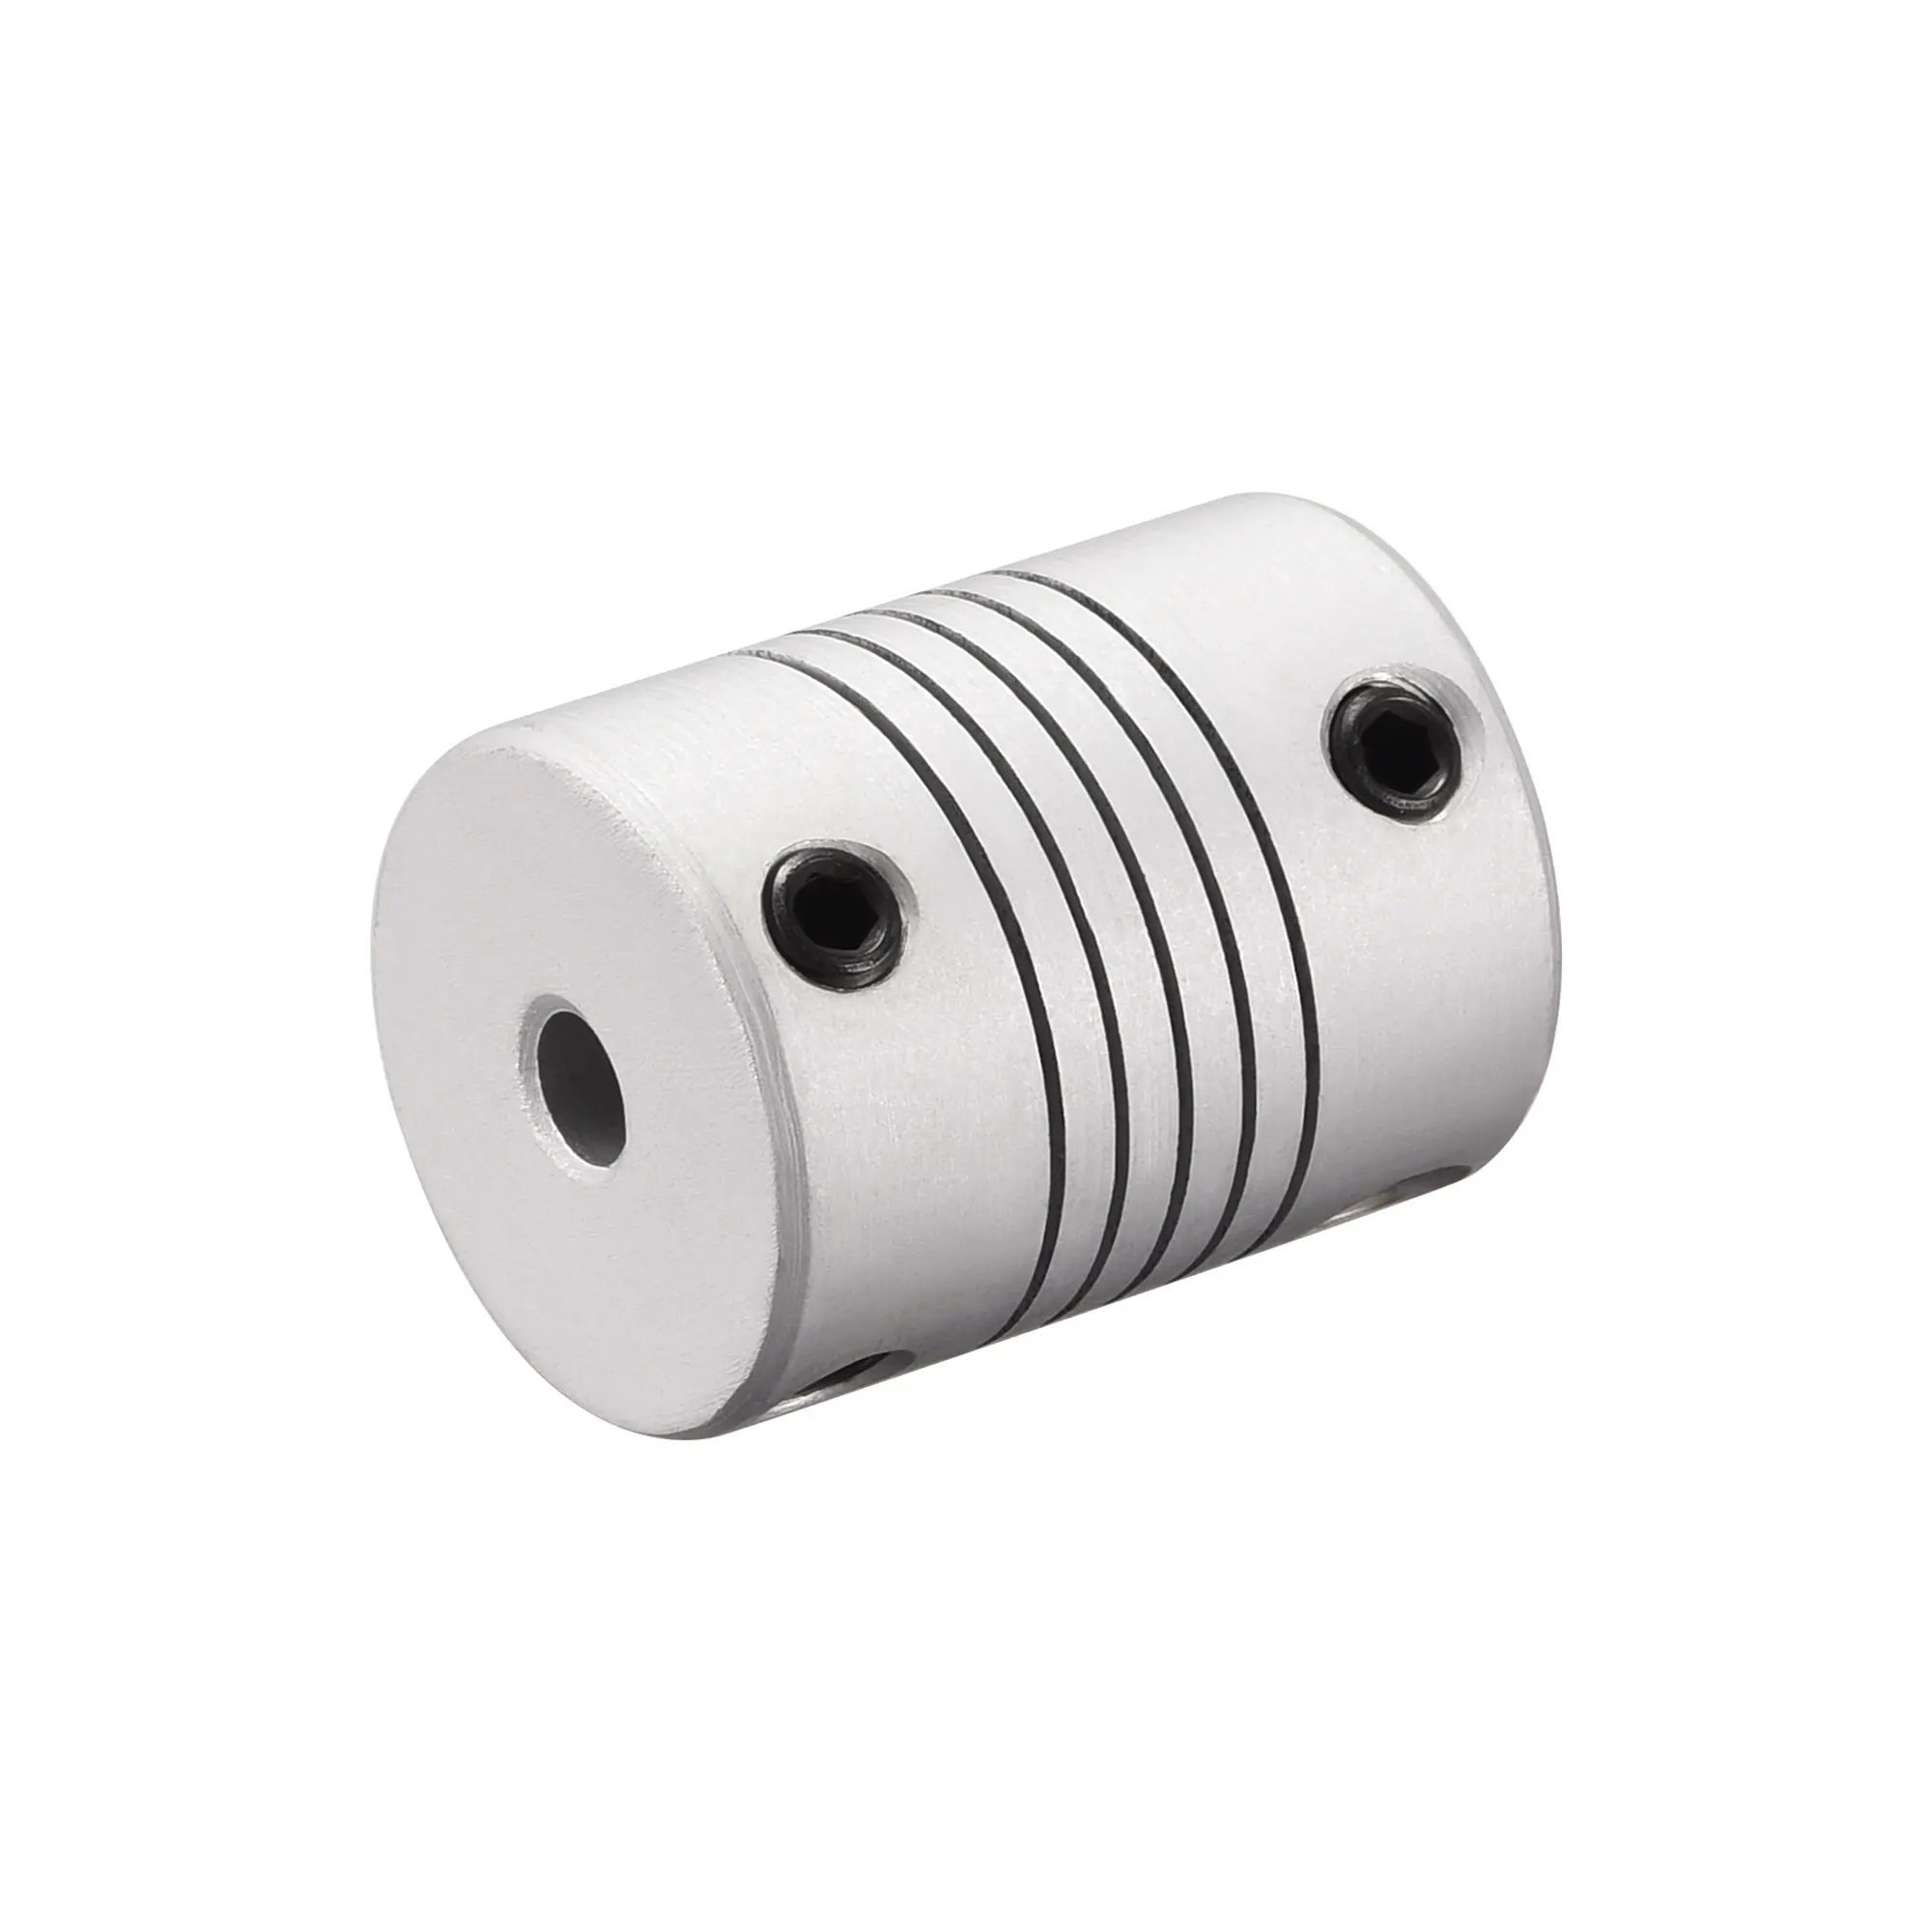 uxcell 3mm to 6mm Aluminum Alloy Shaft Coupling Flexible Coupler Motor Connector Joint L25xD19 Silver 